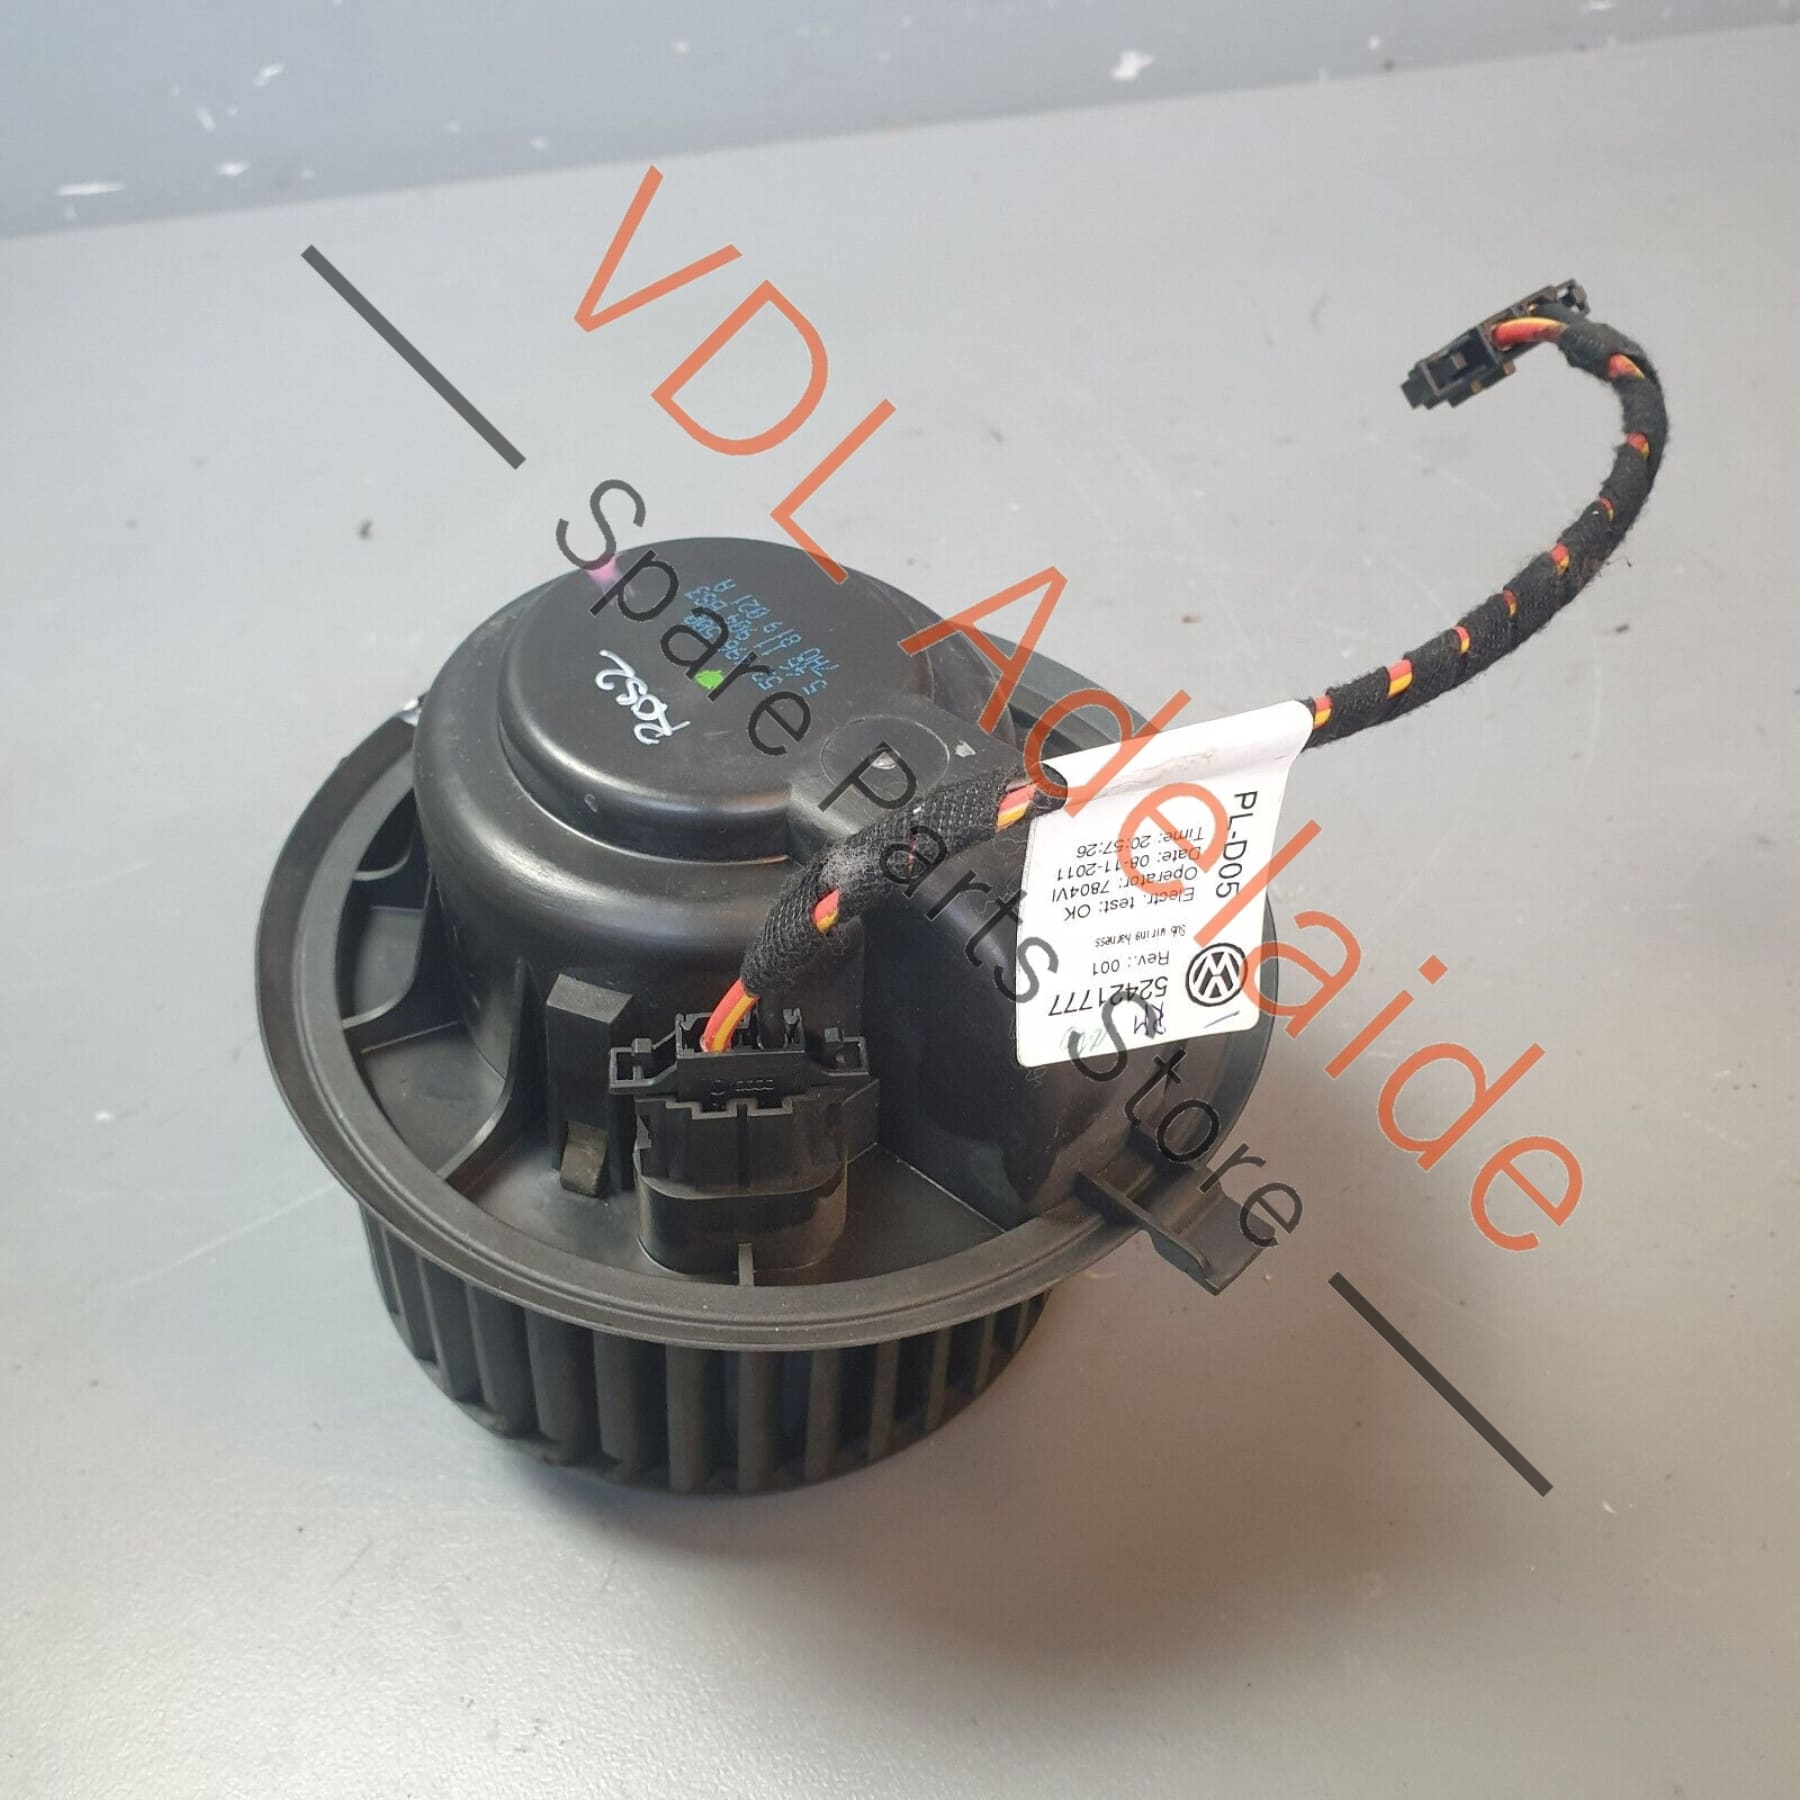 Audi Q7 6.0L V12 4L Air Conditioning AC Blower Fan Motor for Rear 7H0819021A 7E0819021A